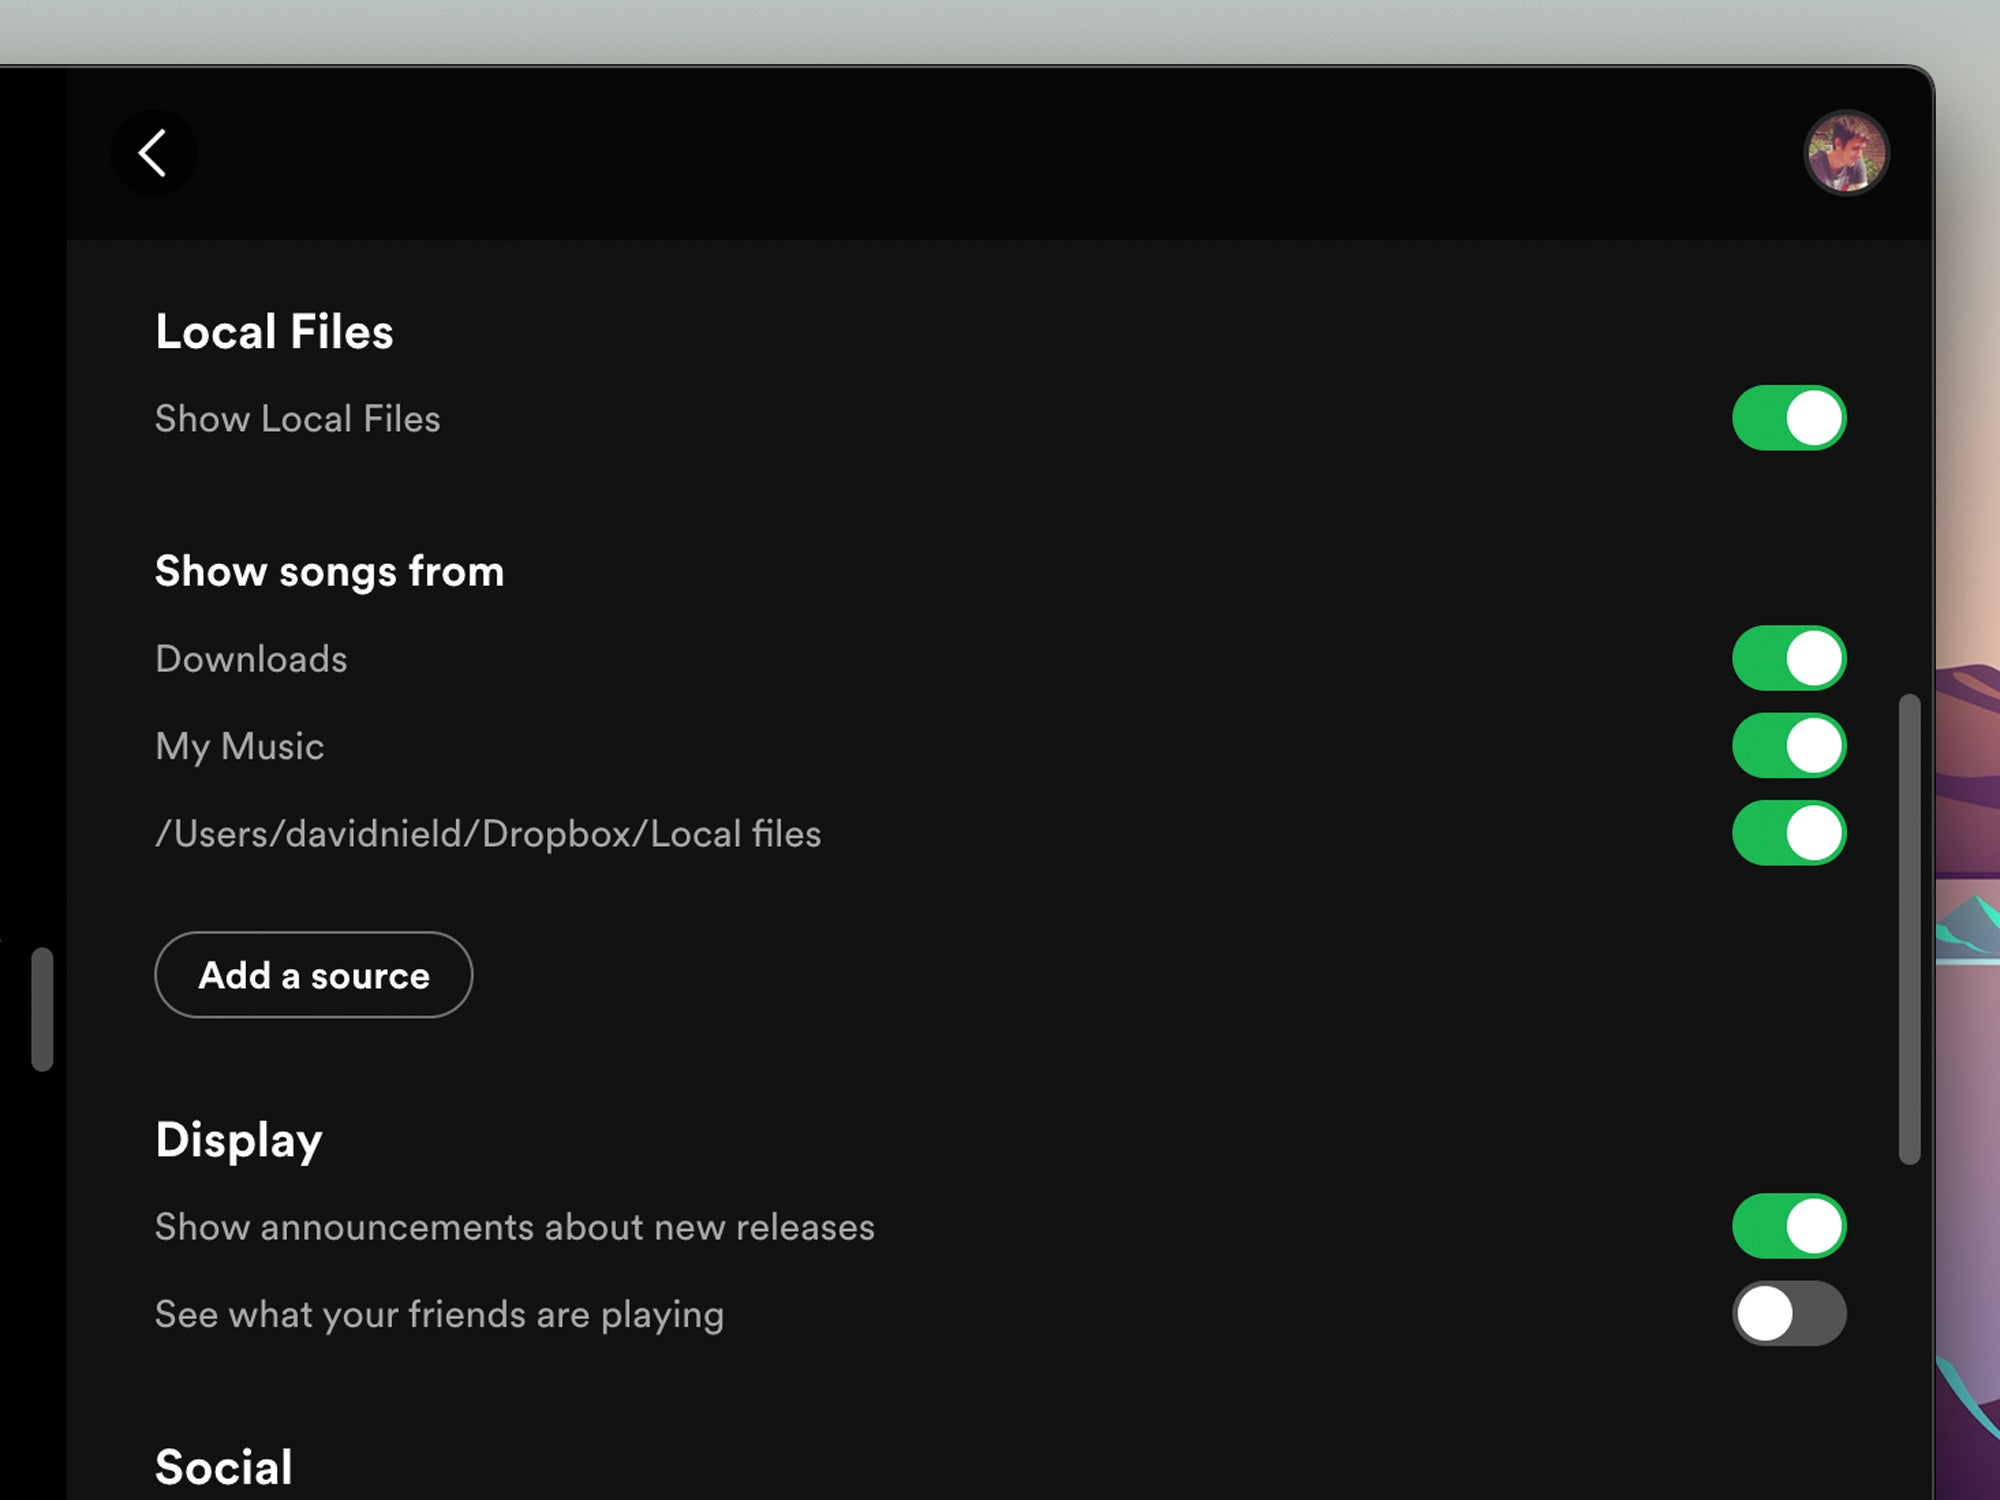 The Spotify interface, showing how to add music that you own to your Spotify playlists.